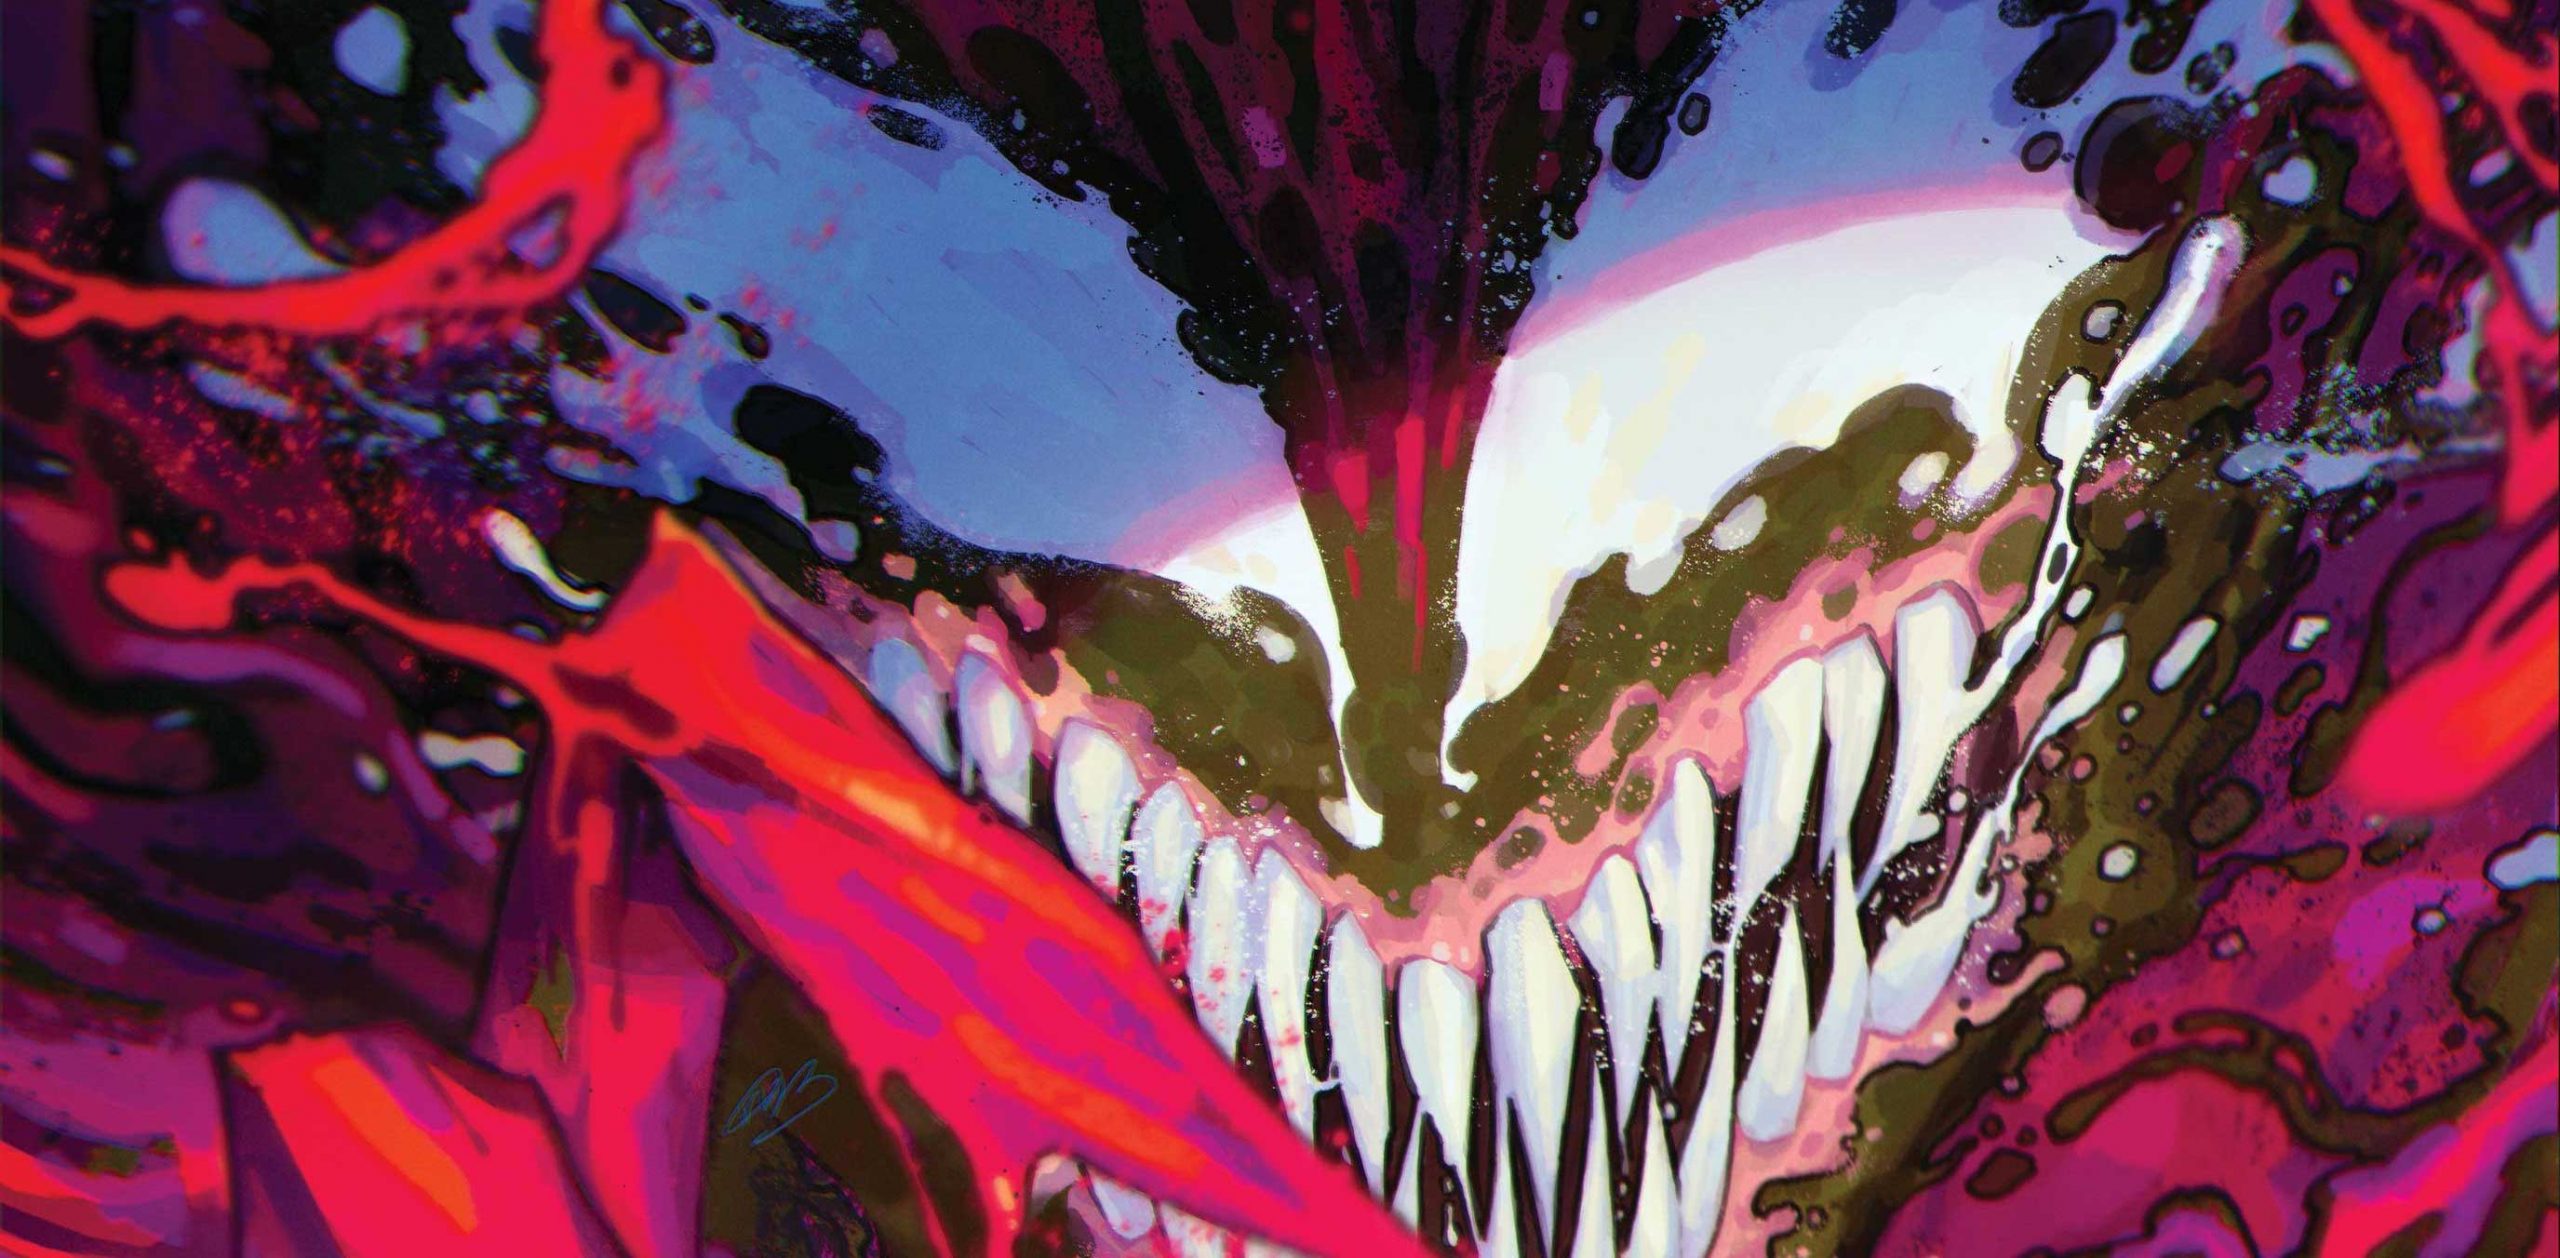 Rose Besch 'Carnage' #1 cover gets in your face